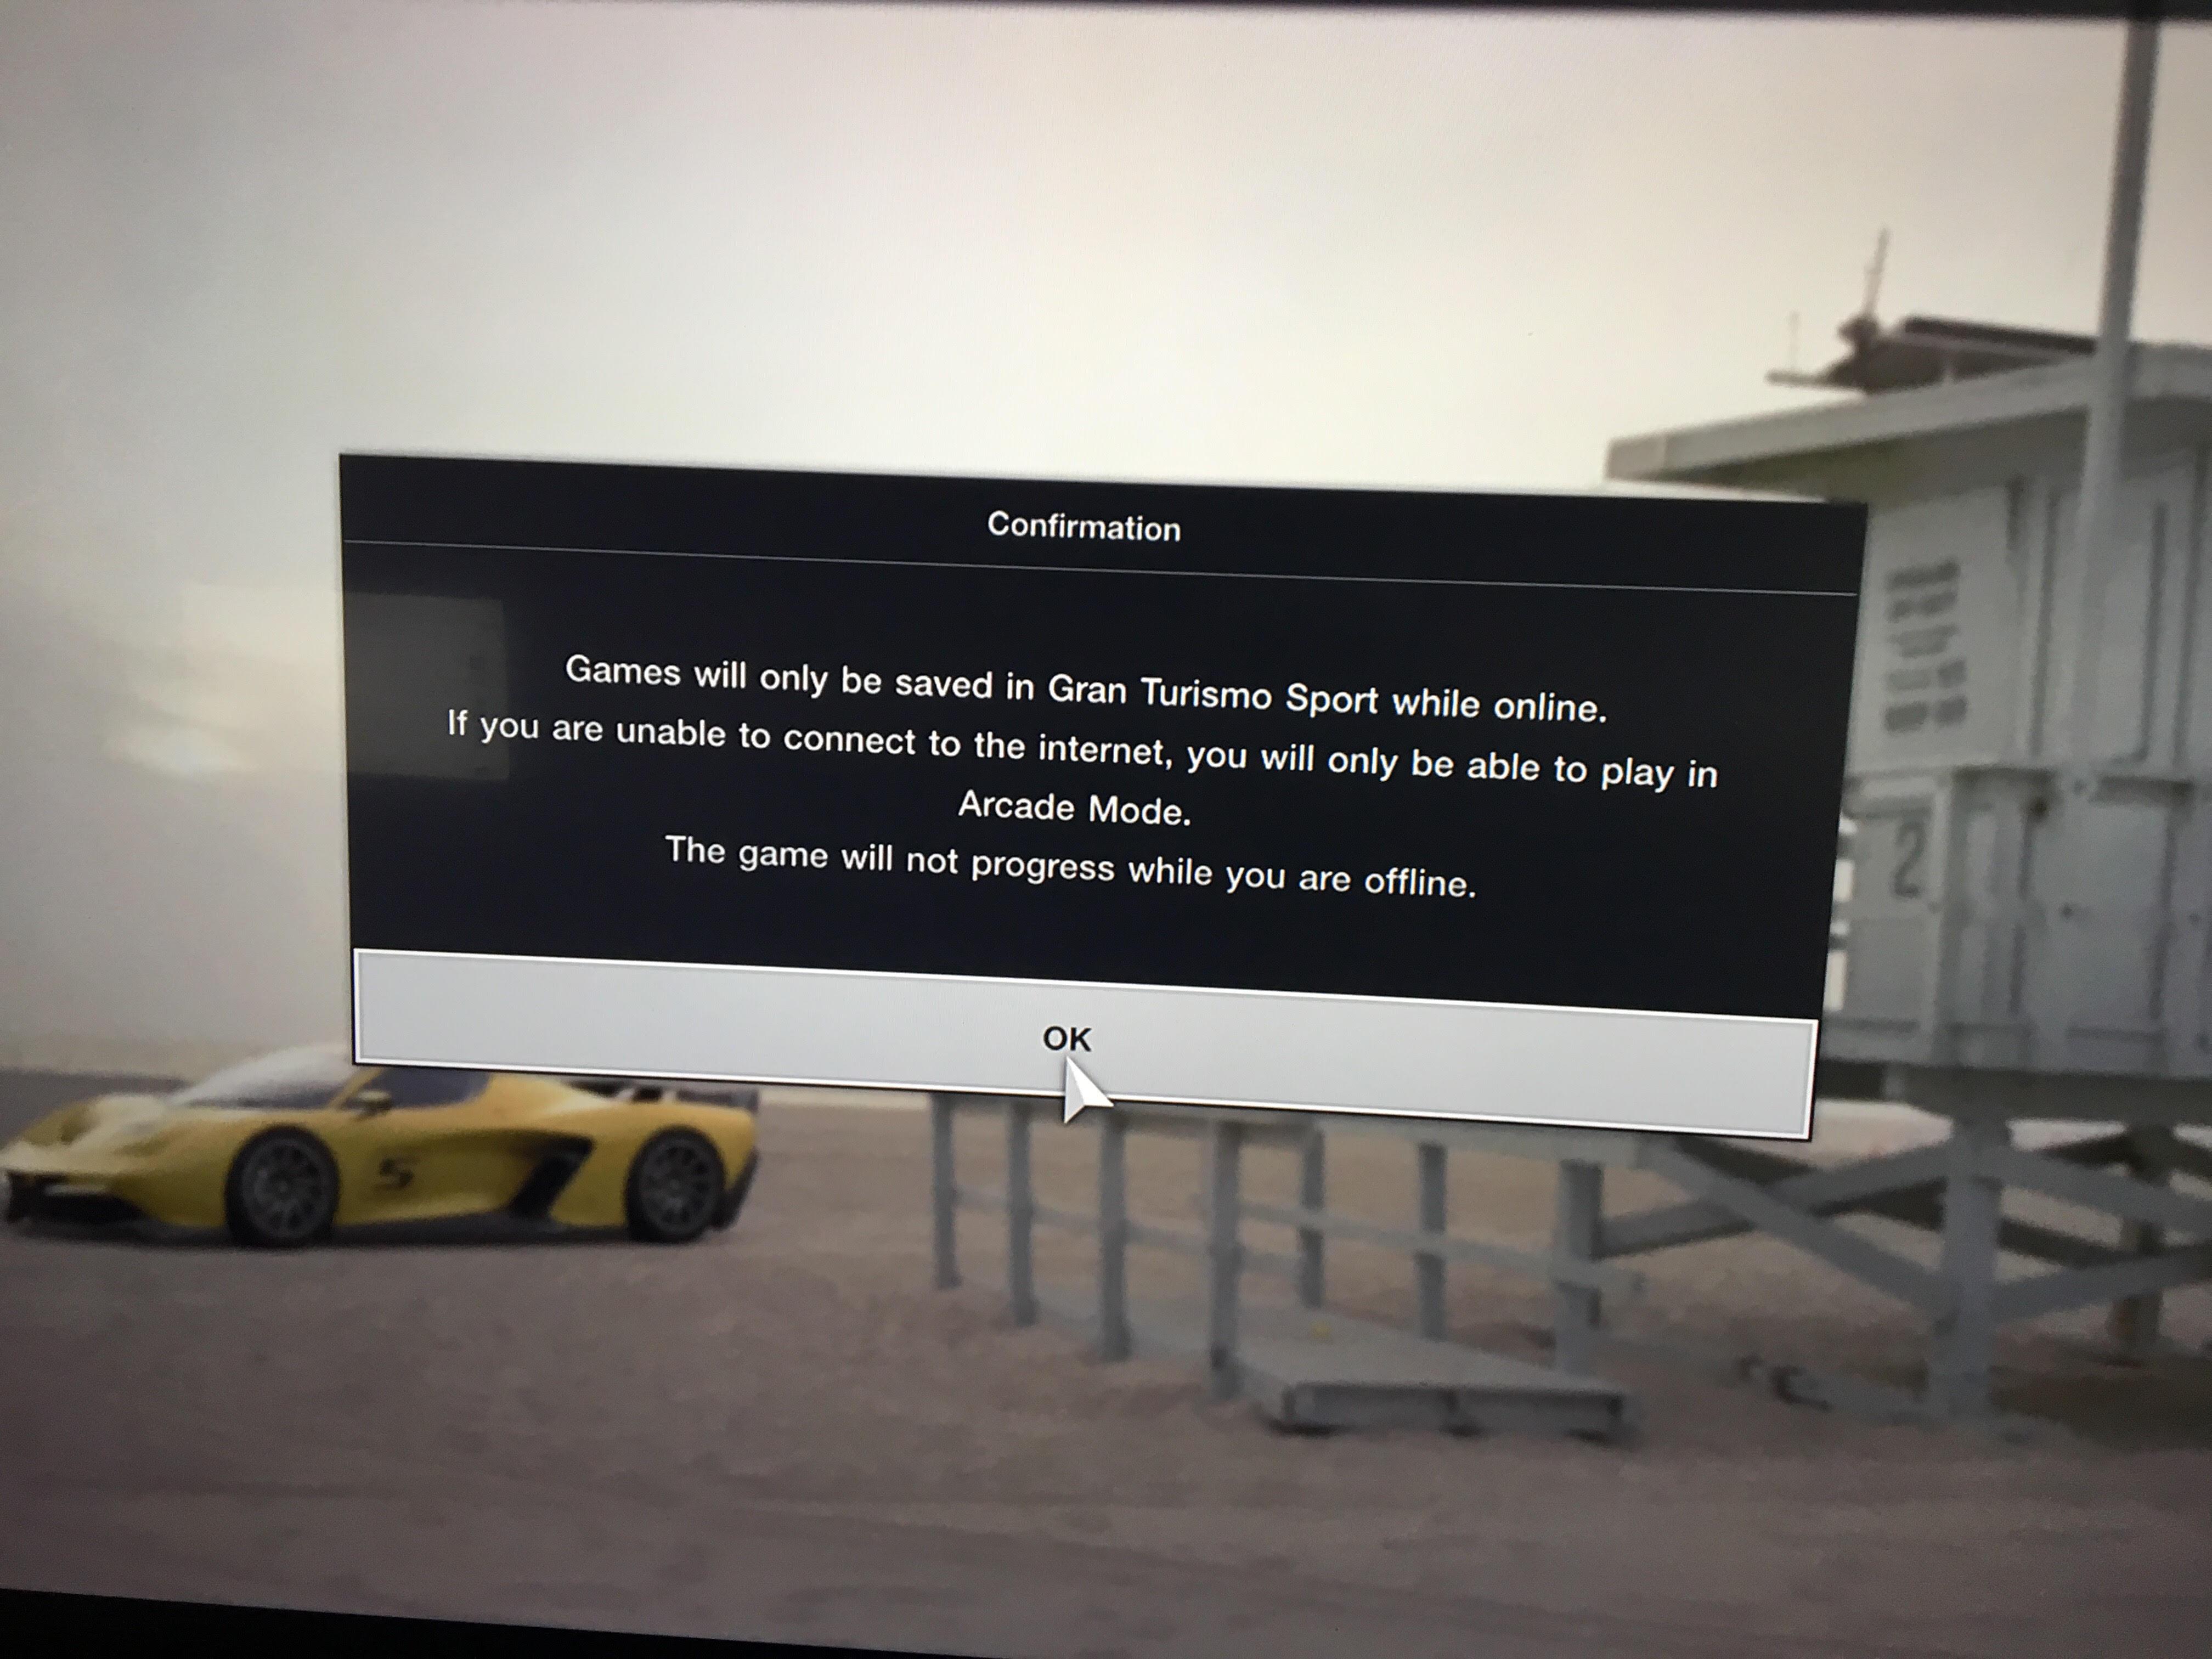 gran turismo sport save offline - Confirmation Games will only be saved in Gran Turismo Sport while online, If you are unable to connect to the internet, you will only be able to play in Arcade Mode. The game will not progress while you are offline.